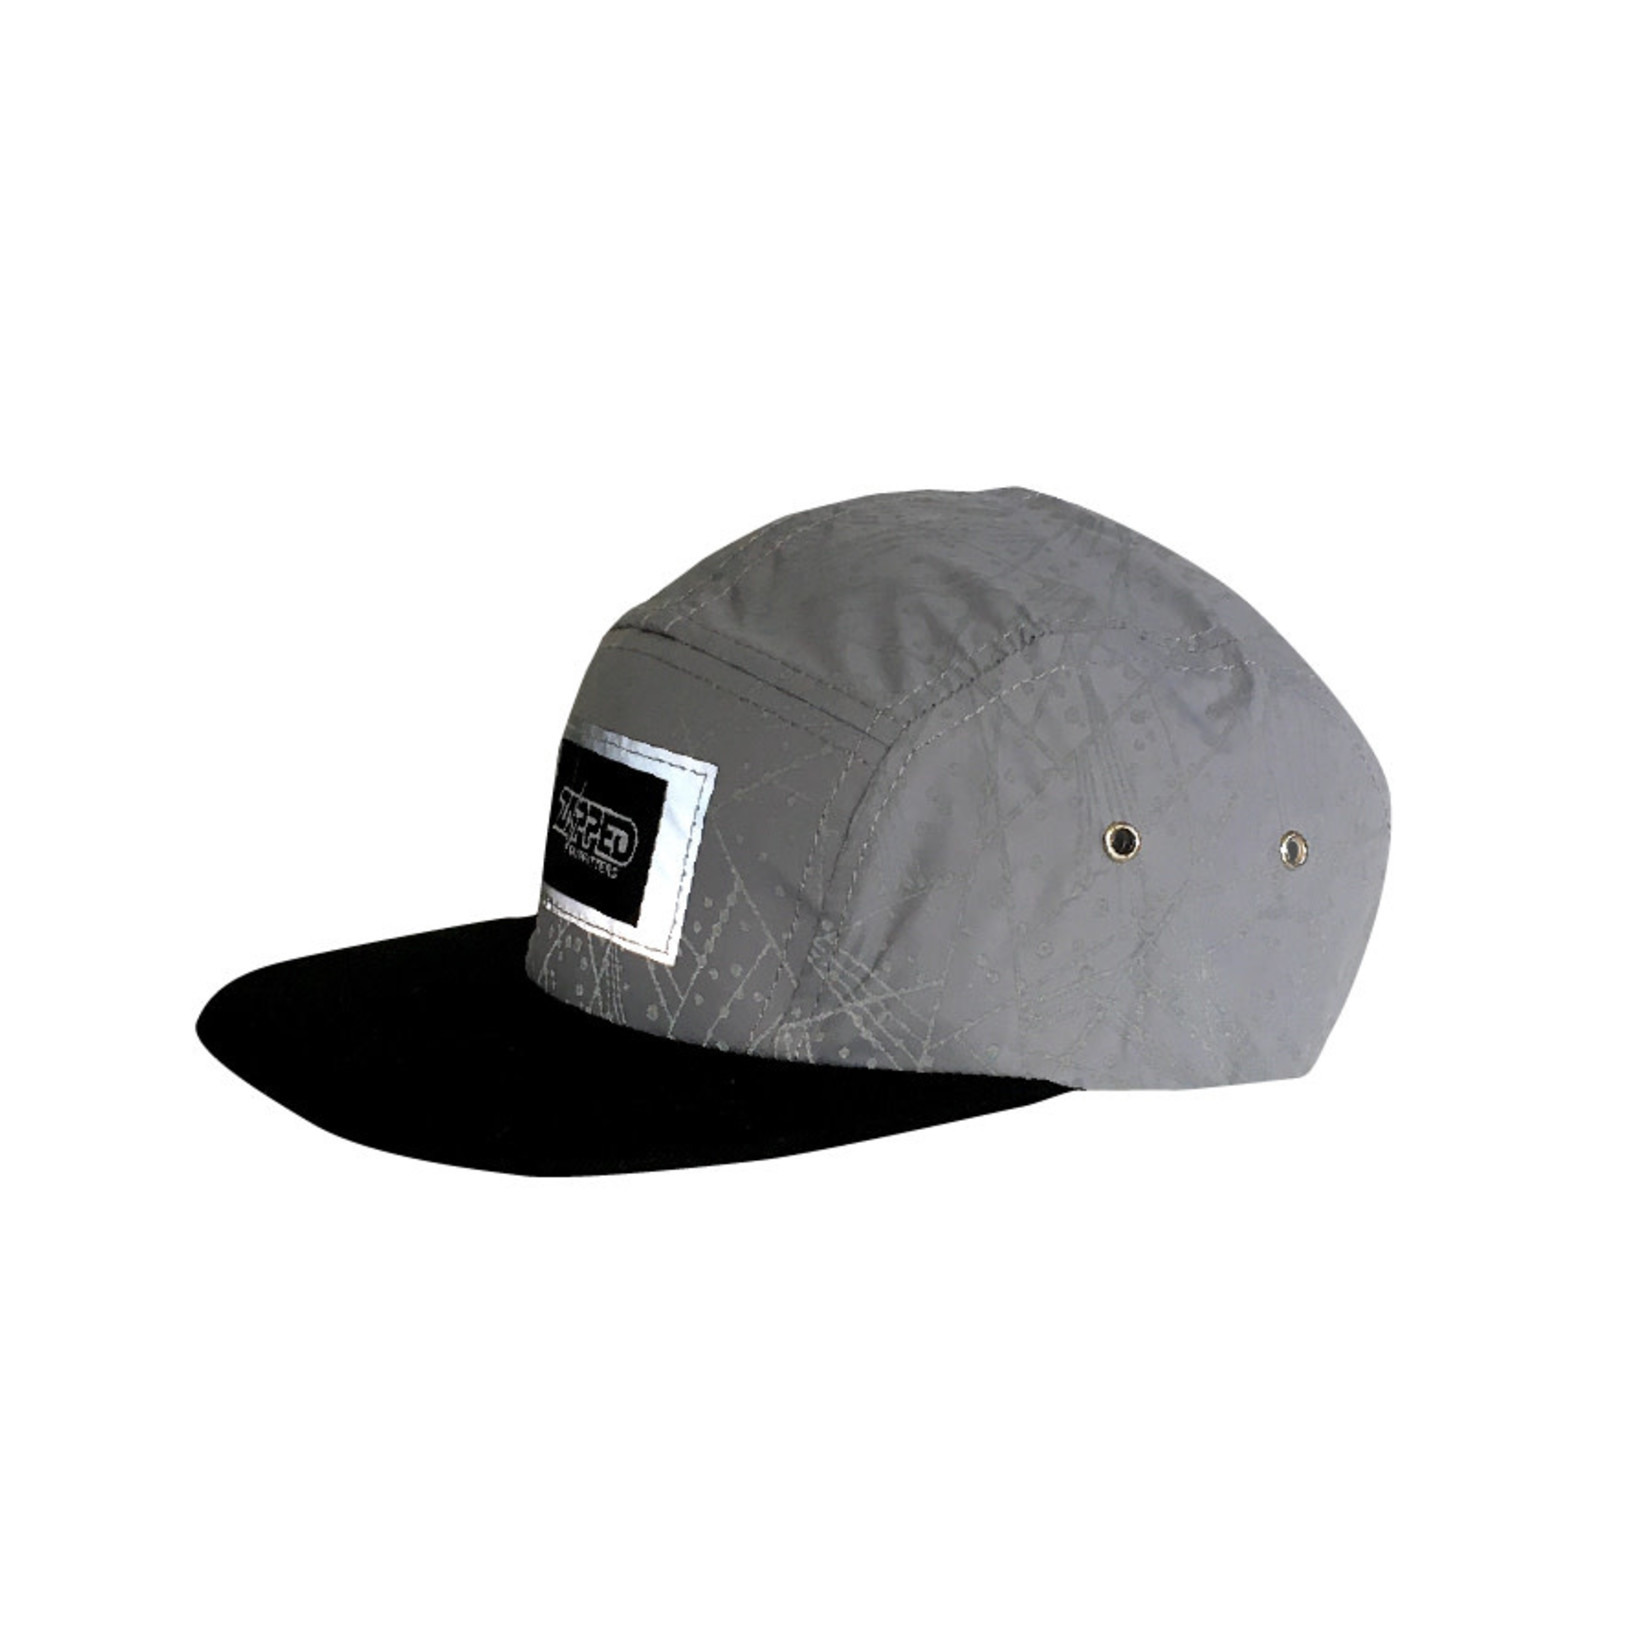 Zapped Outfitters Zapped 5-Panel Hat